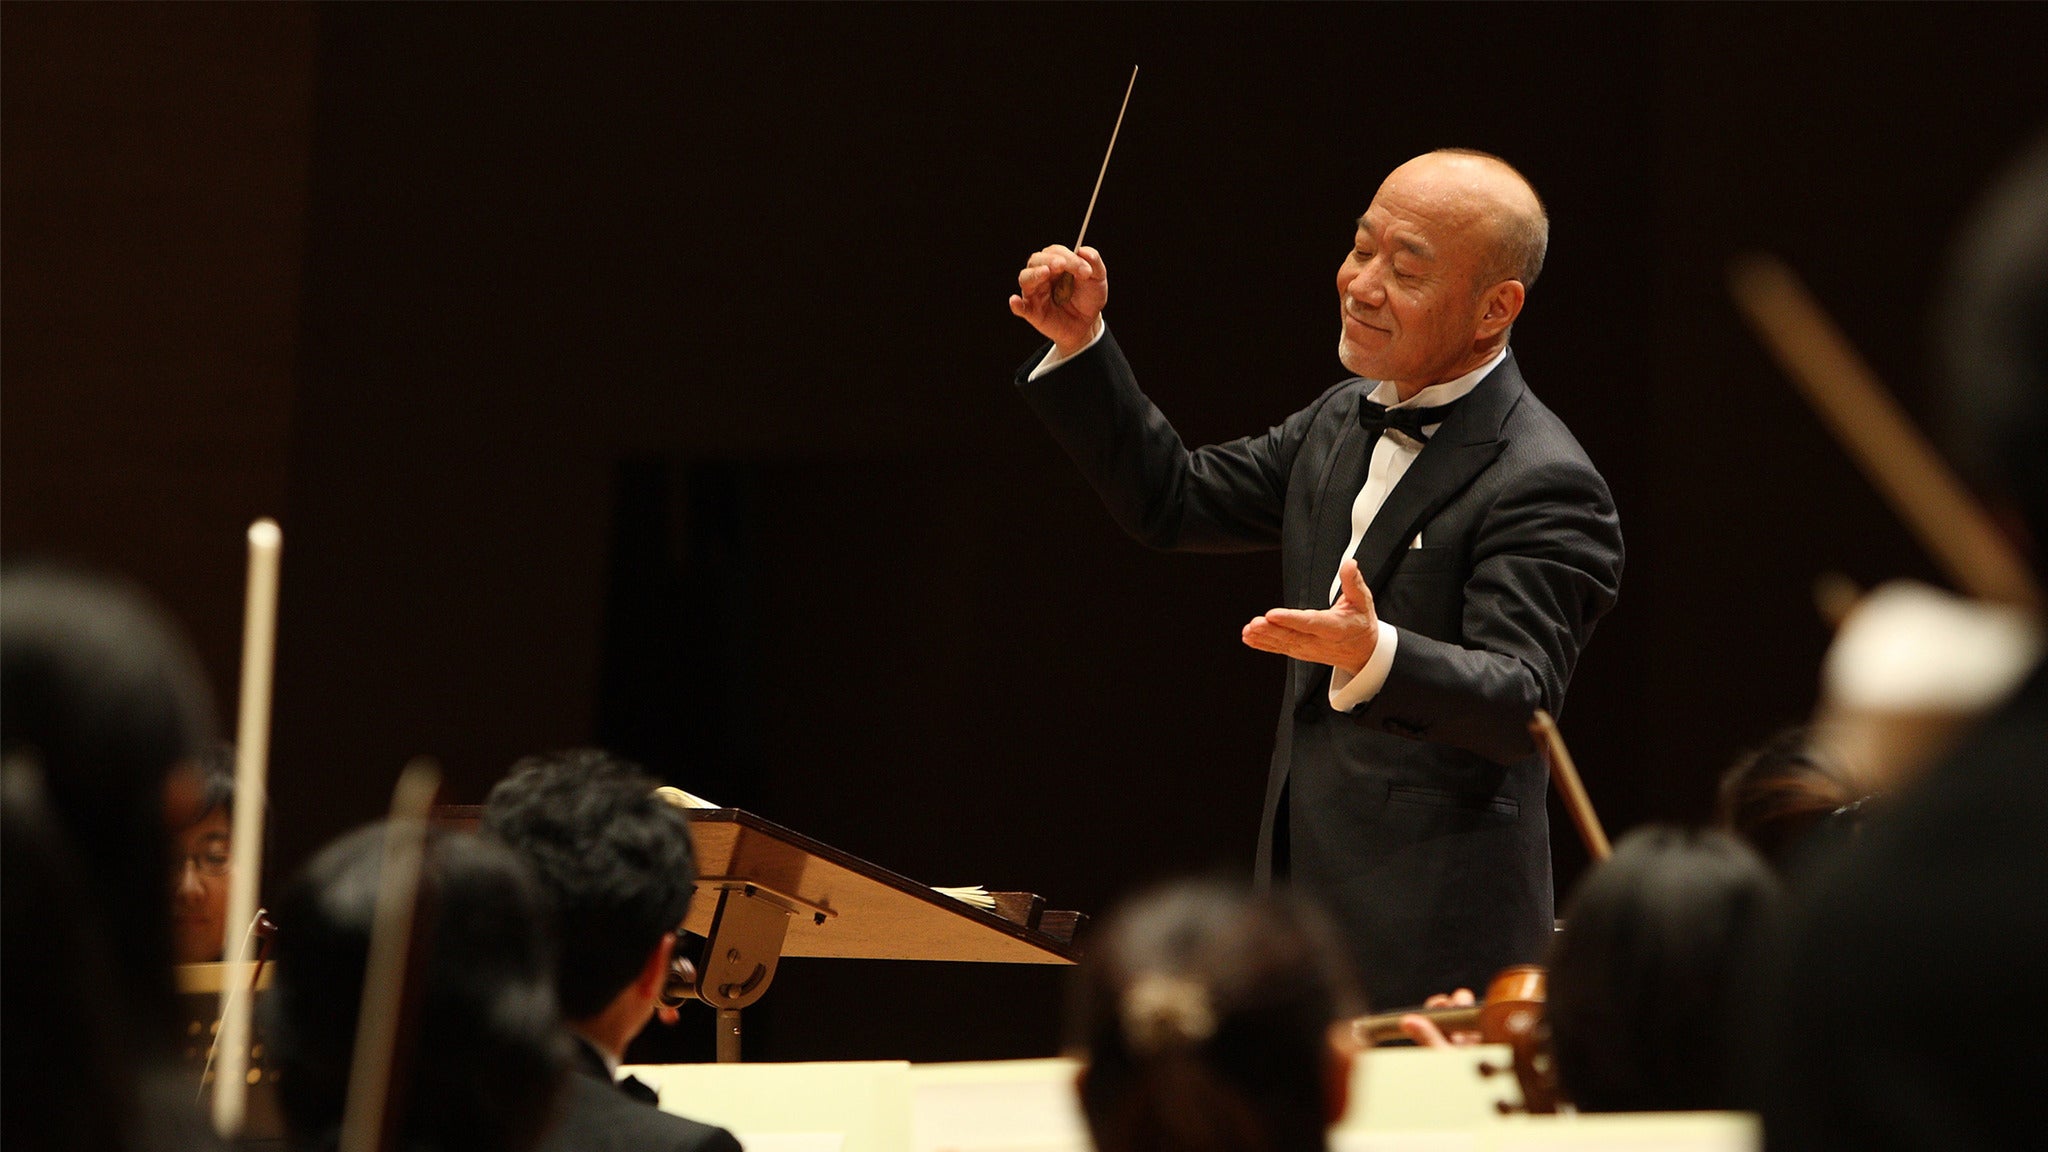 Joe Hisaishi with the TSO in Concert, TO Live at Meridian Hall, Toronto